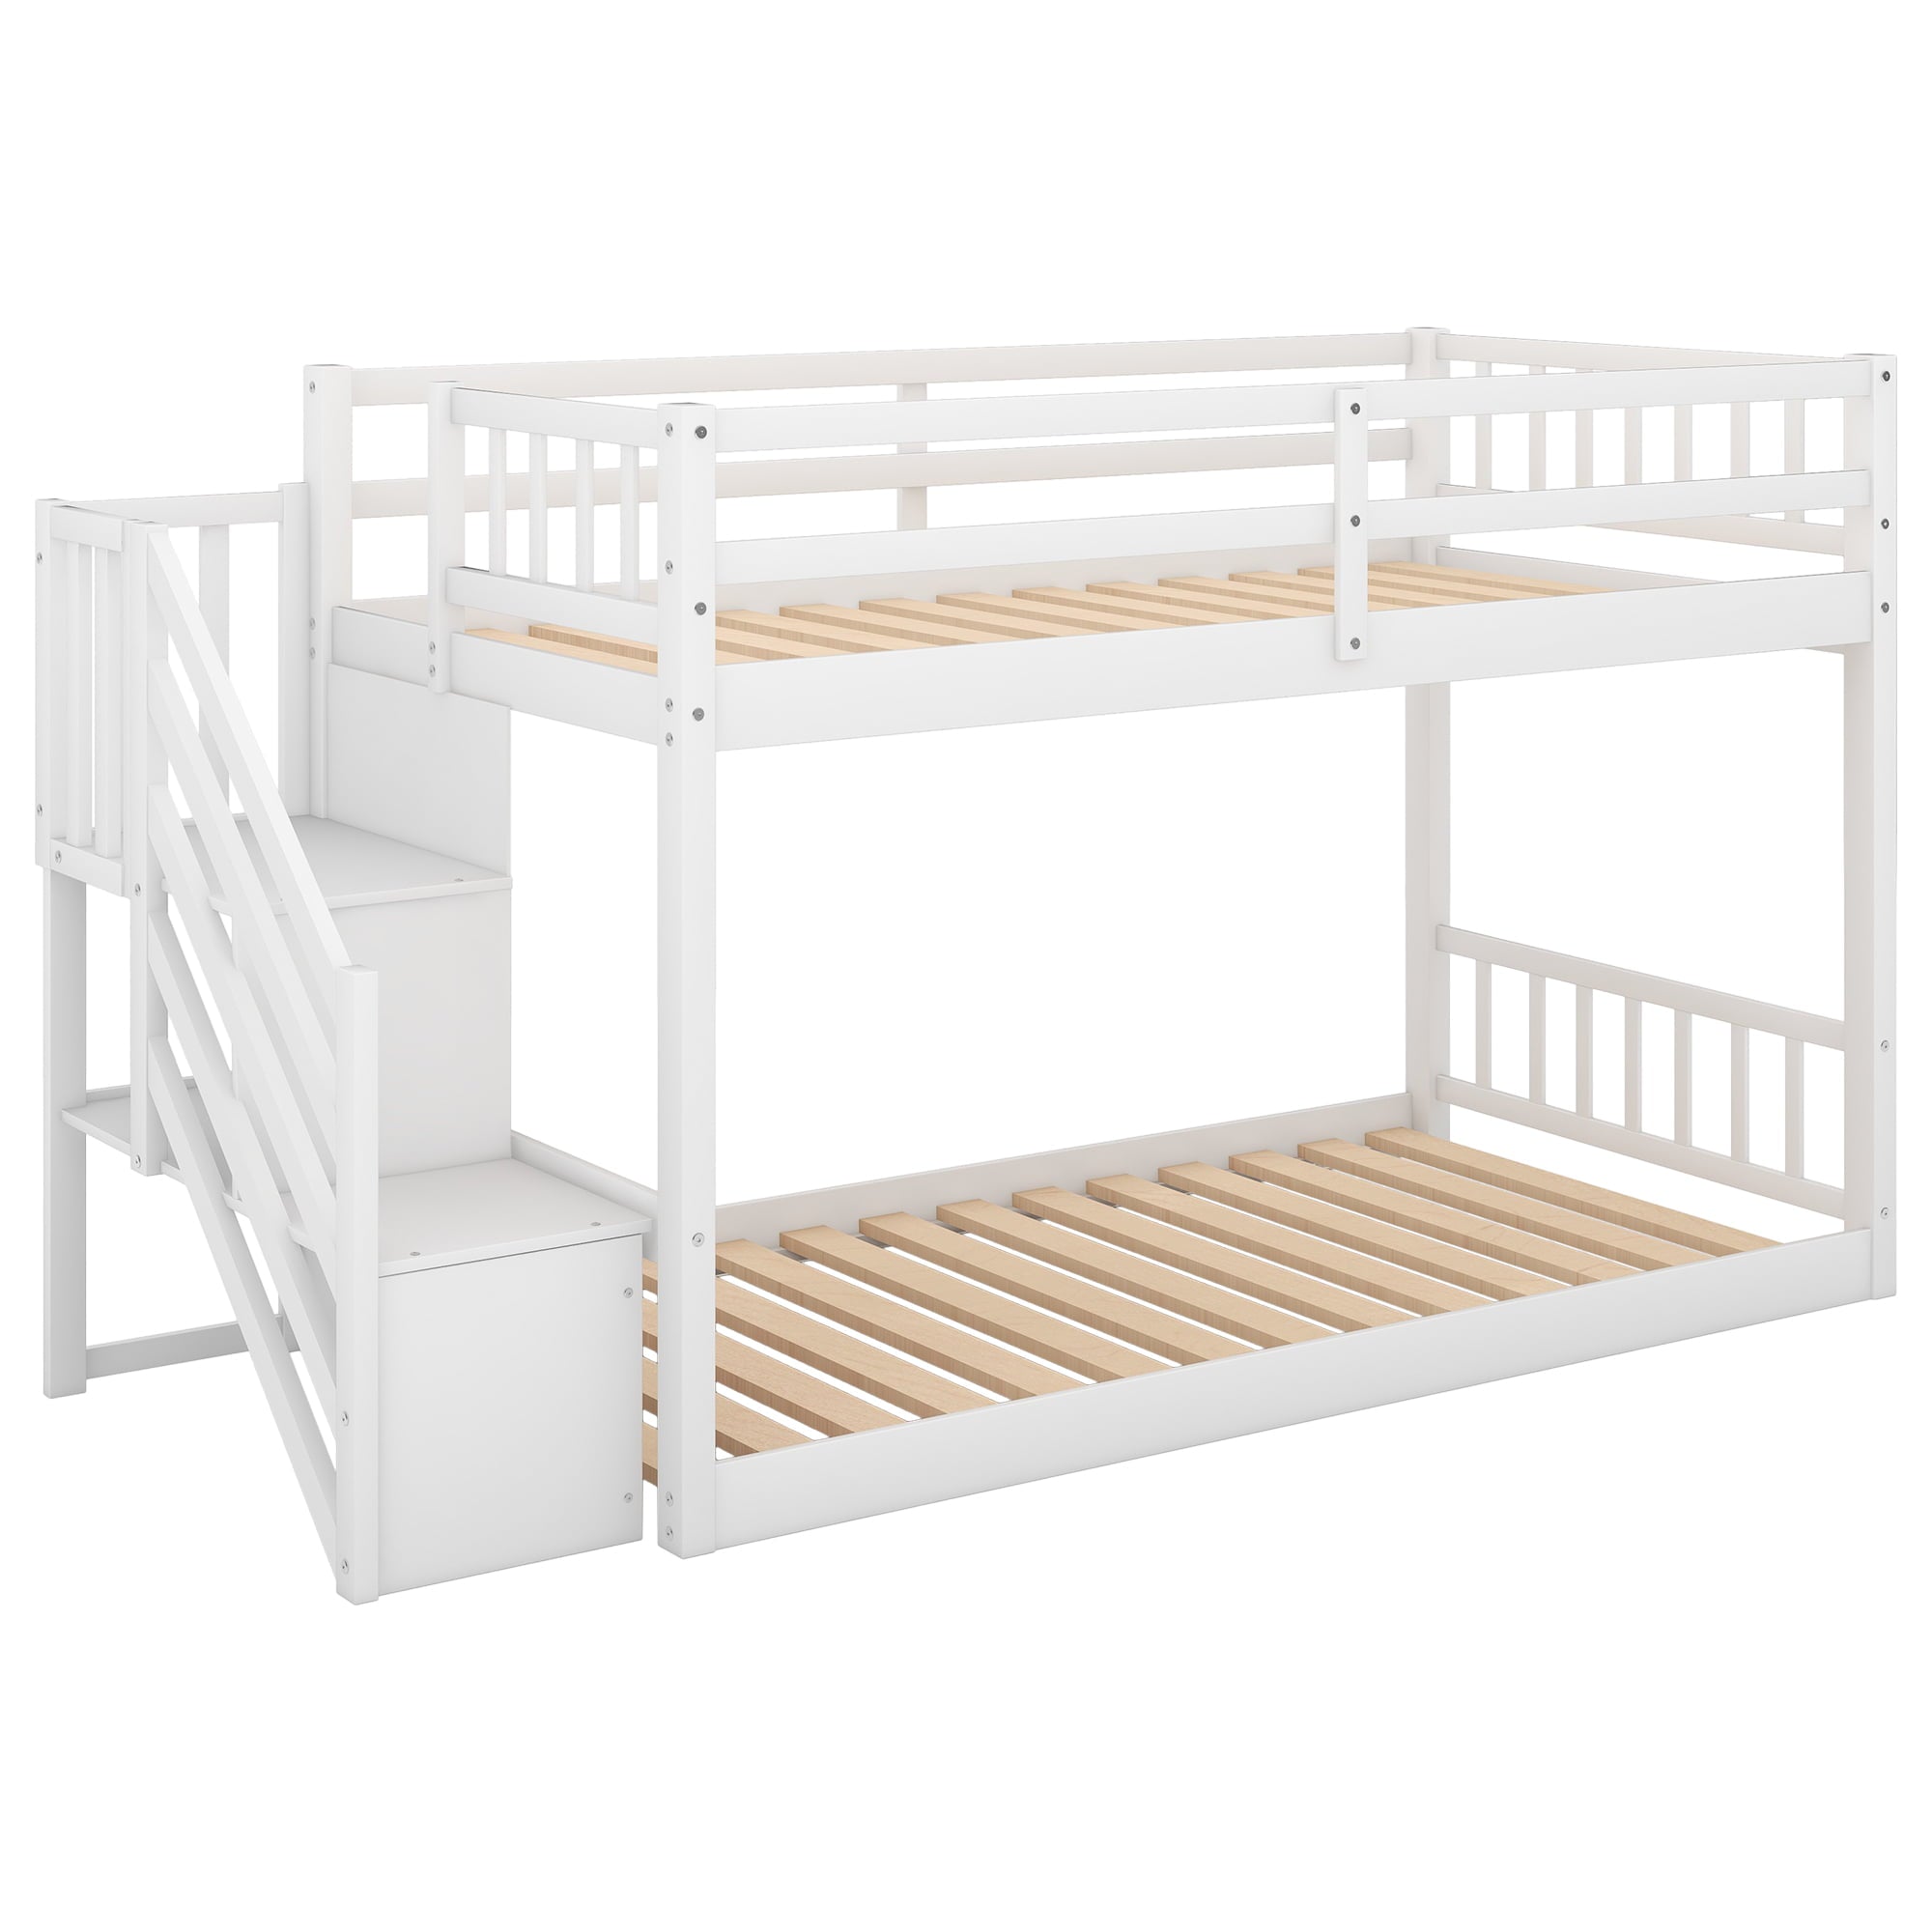 Euroco Wood Twin over Twin Floor Bunk Bed with Stairs for Kids Room, White